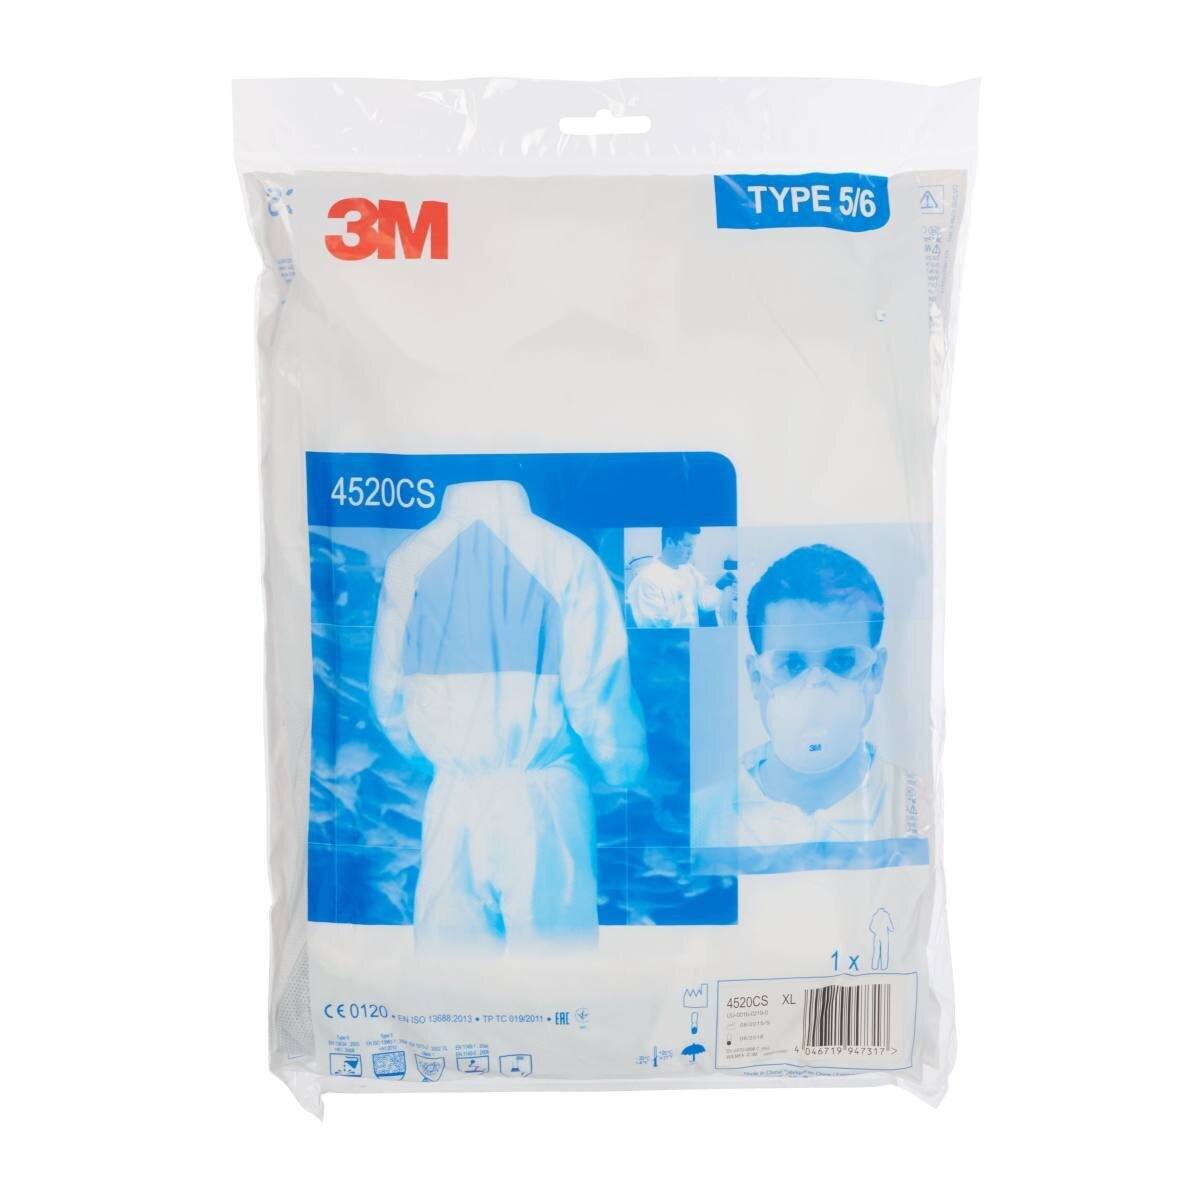 3M 4532+W2X, coverall, white, TYPE 5/6, size 2XL, material SSMMS low-linting, breathable, detachable zipper, knitted cuffs